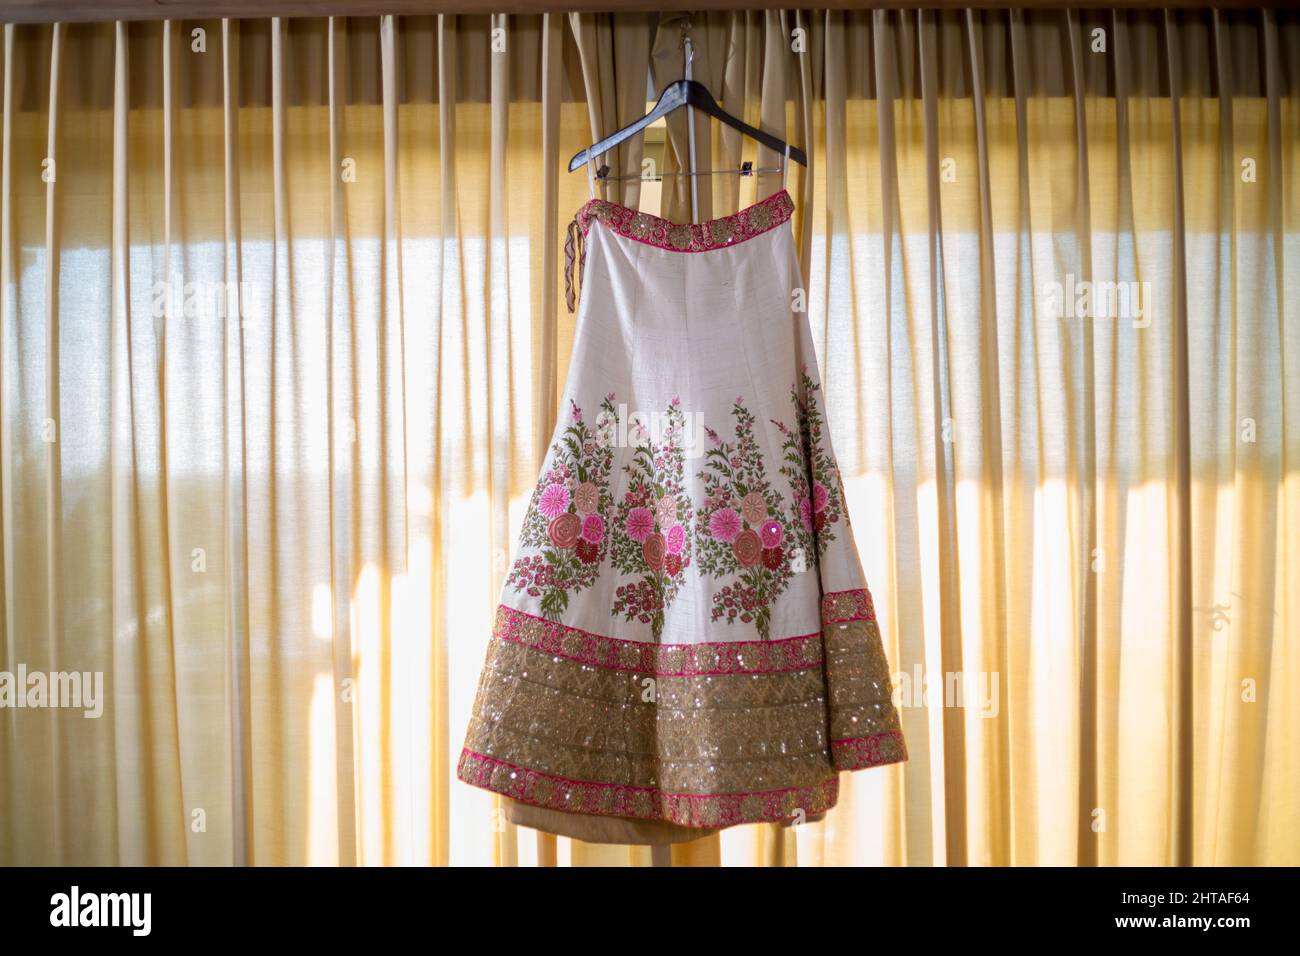 A beautiful traditional Indian wedding dress hanging in front of curtains Stock Photo